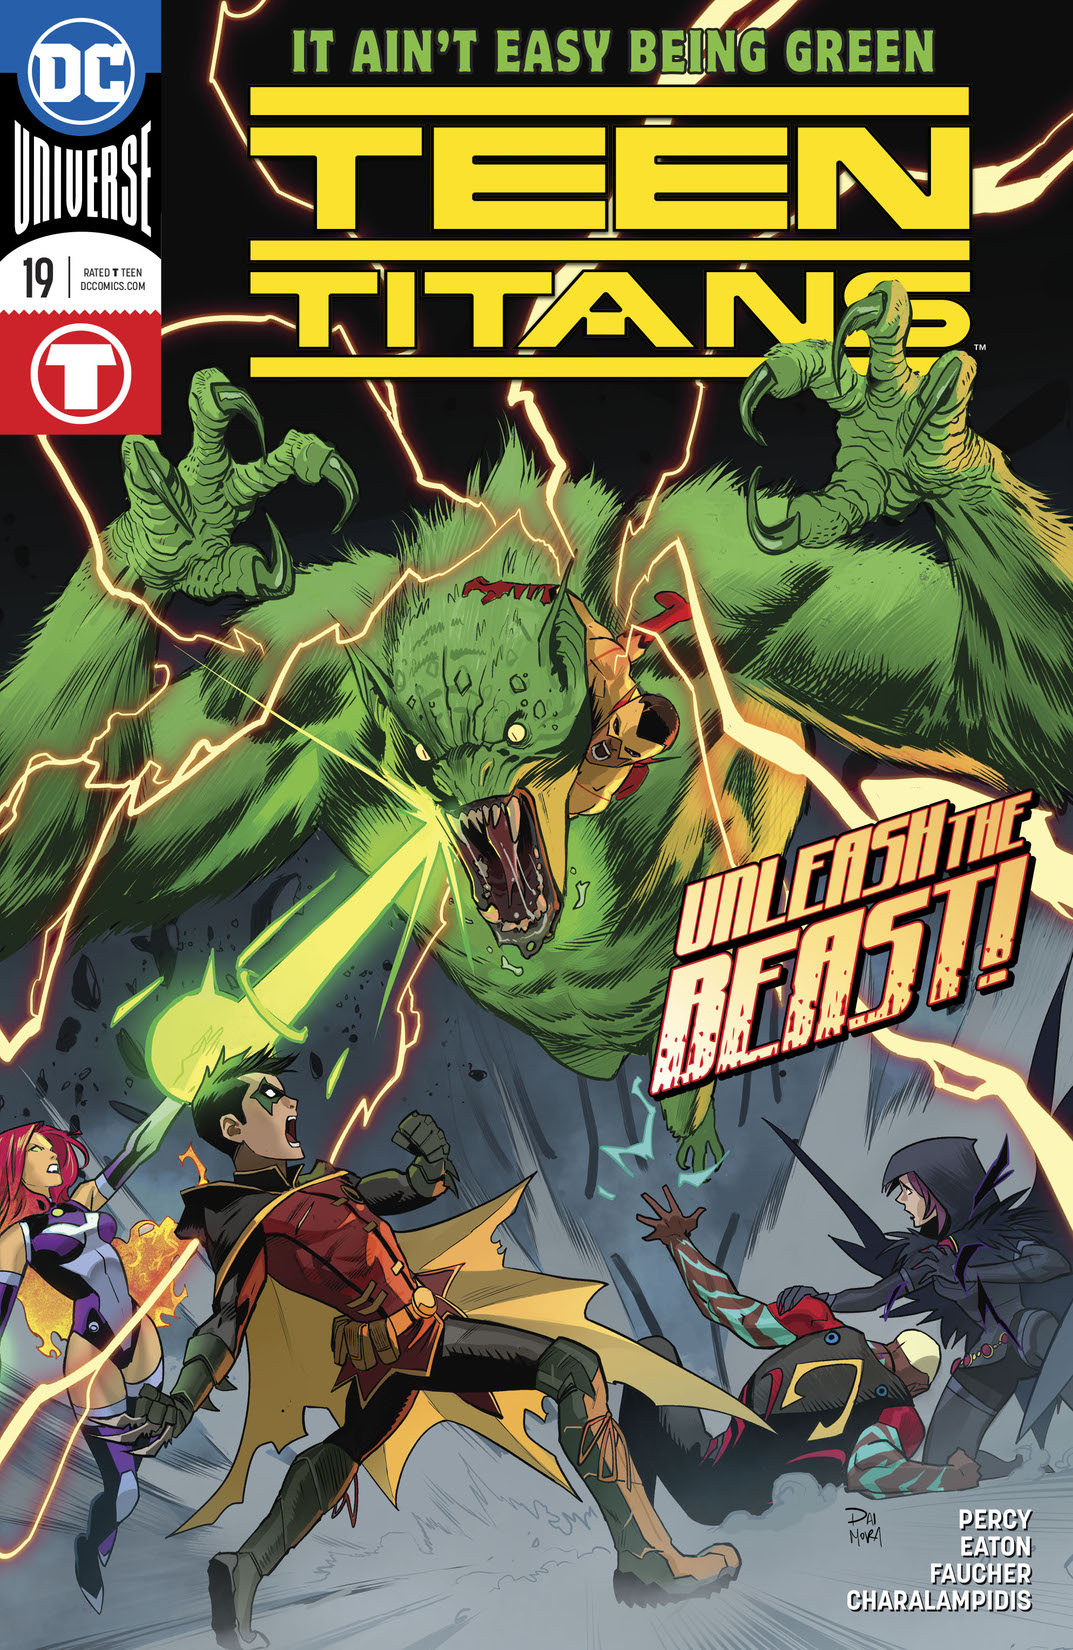 Teen Titans (2016-) #19 preview images